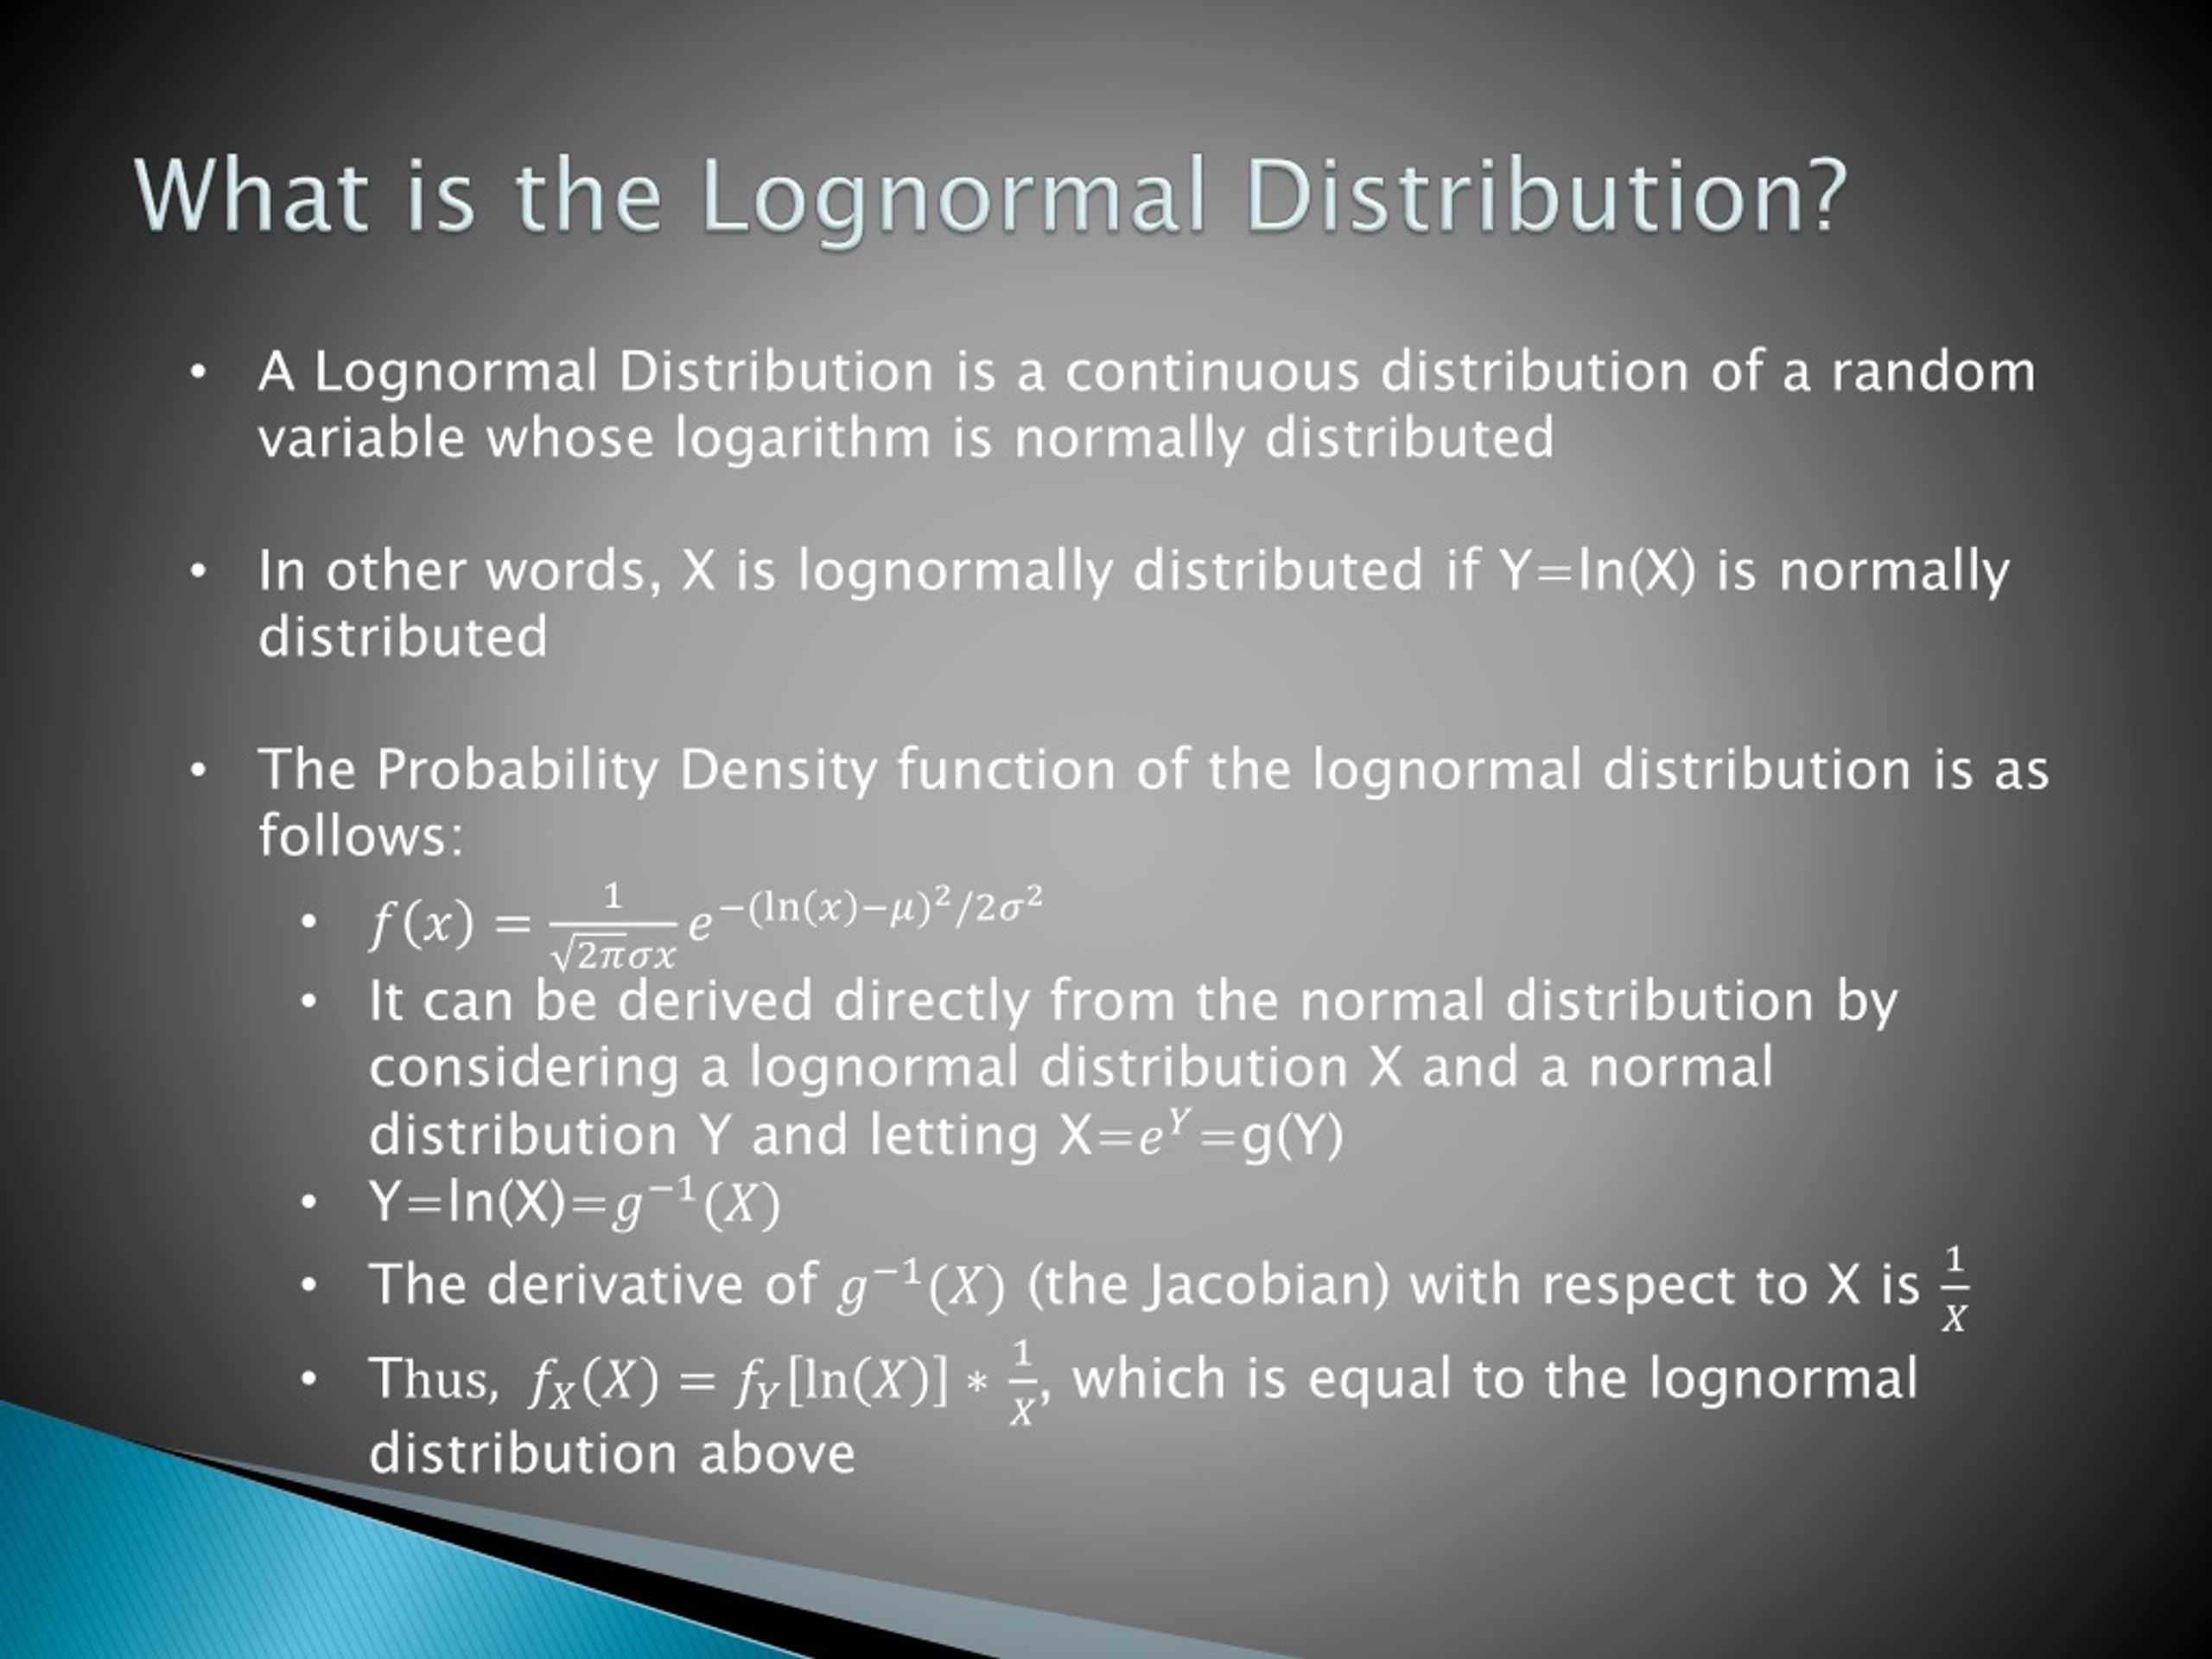 Ppt The Lognormal Distribution Powerpoint Presentation Free Download Id8917698 2972